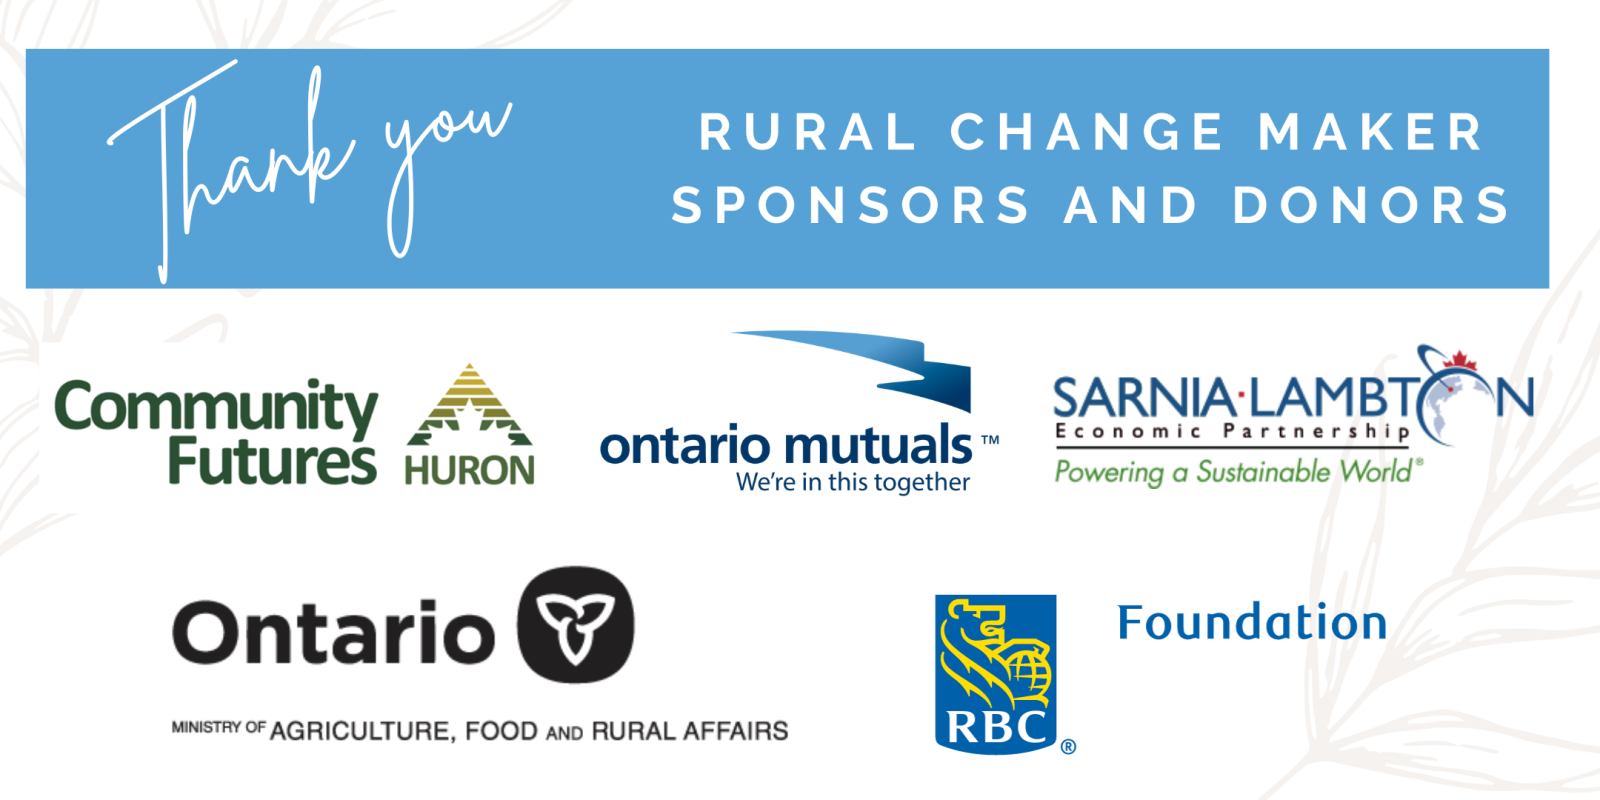 Rural Change Maker Donors and Sponsors Logos